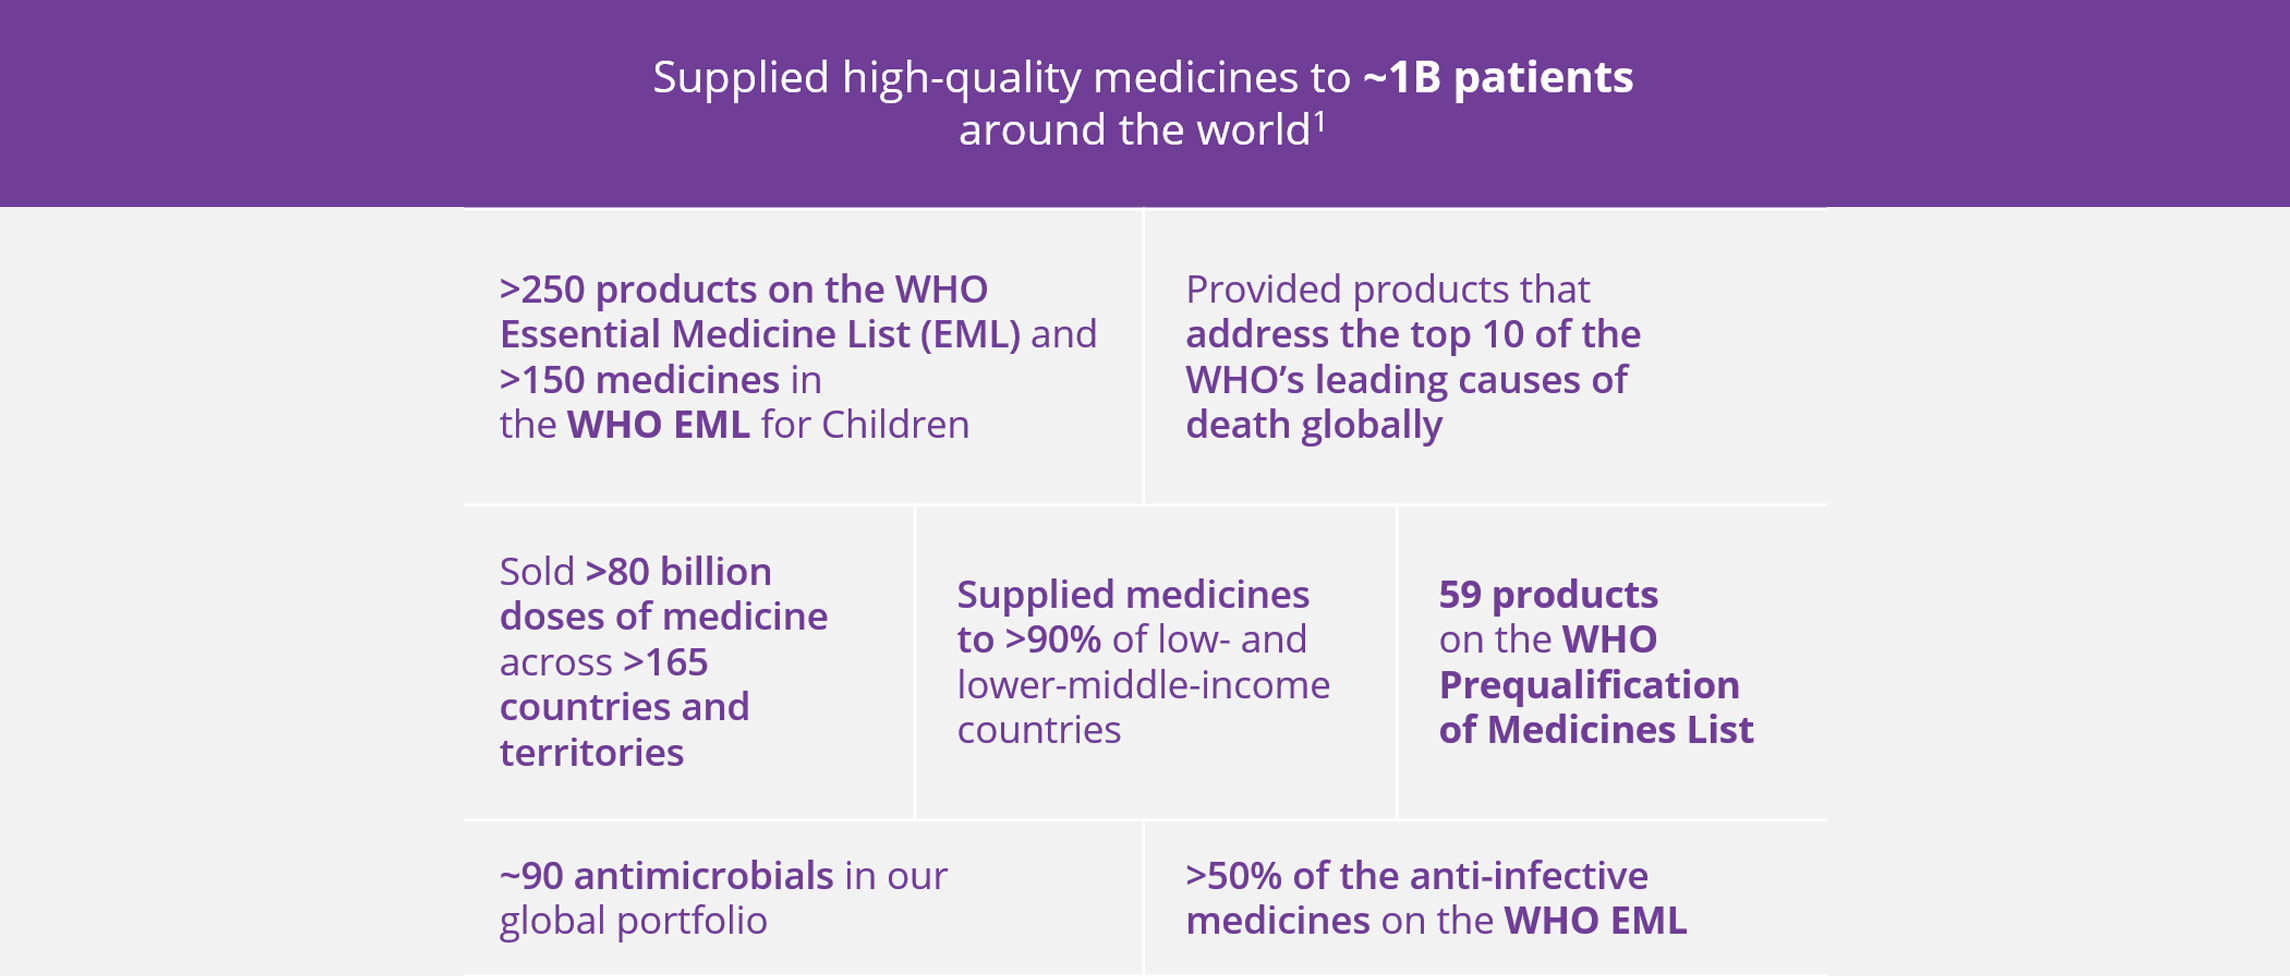 Supplied high quality medicines to 1 Billion patients around the world